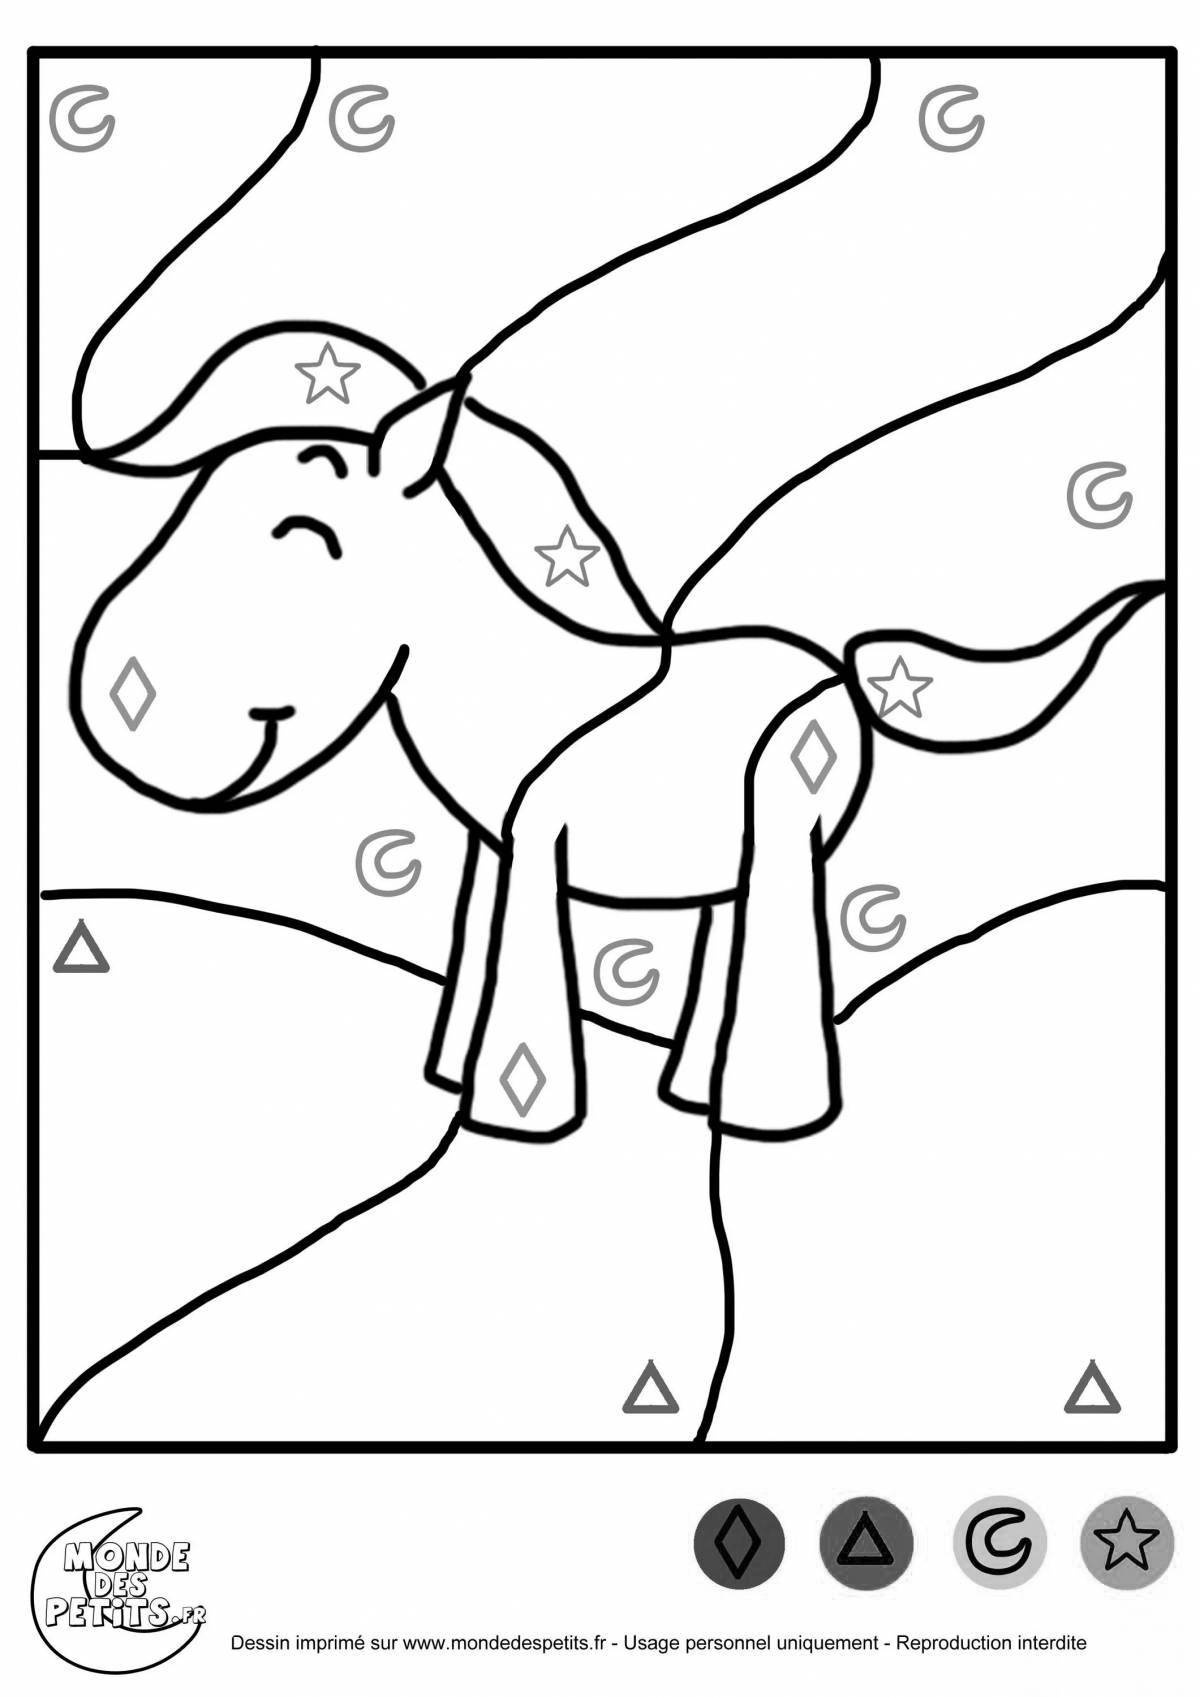 Playful unicorn coloring by numbers